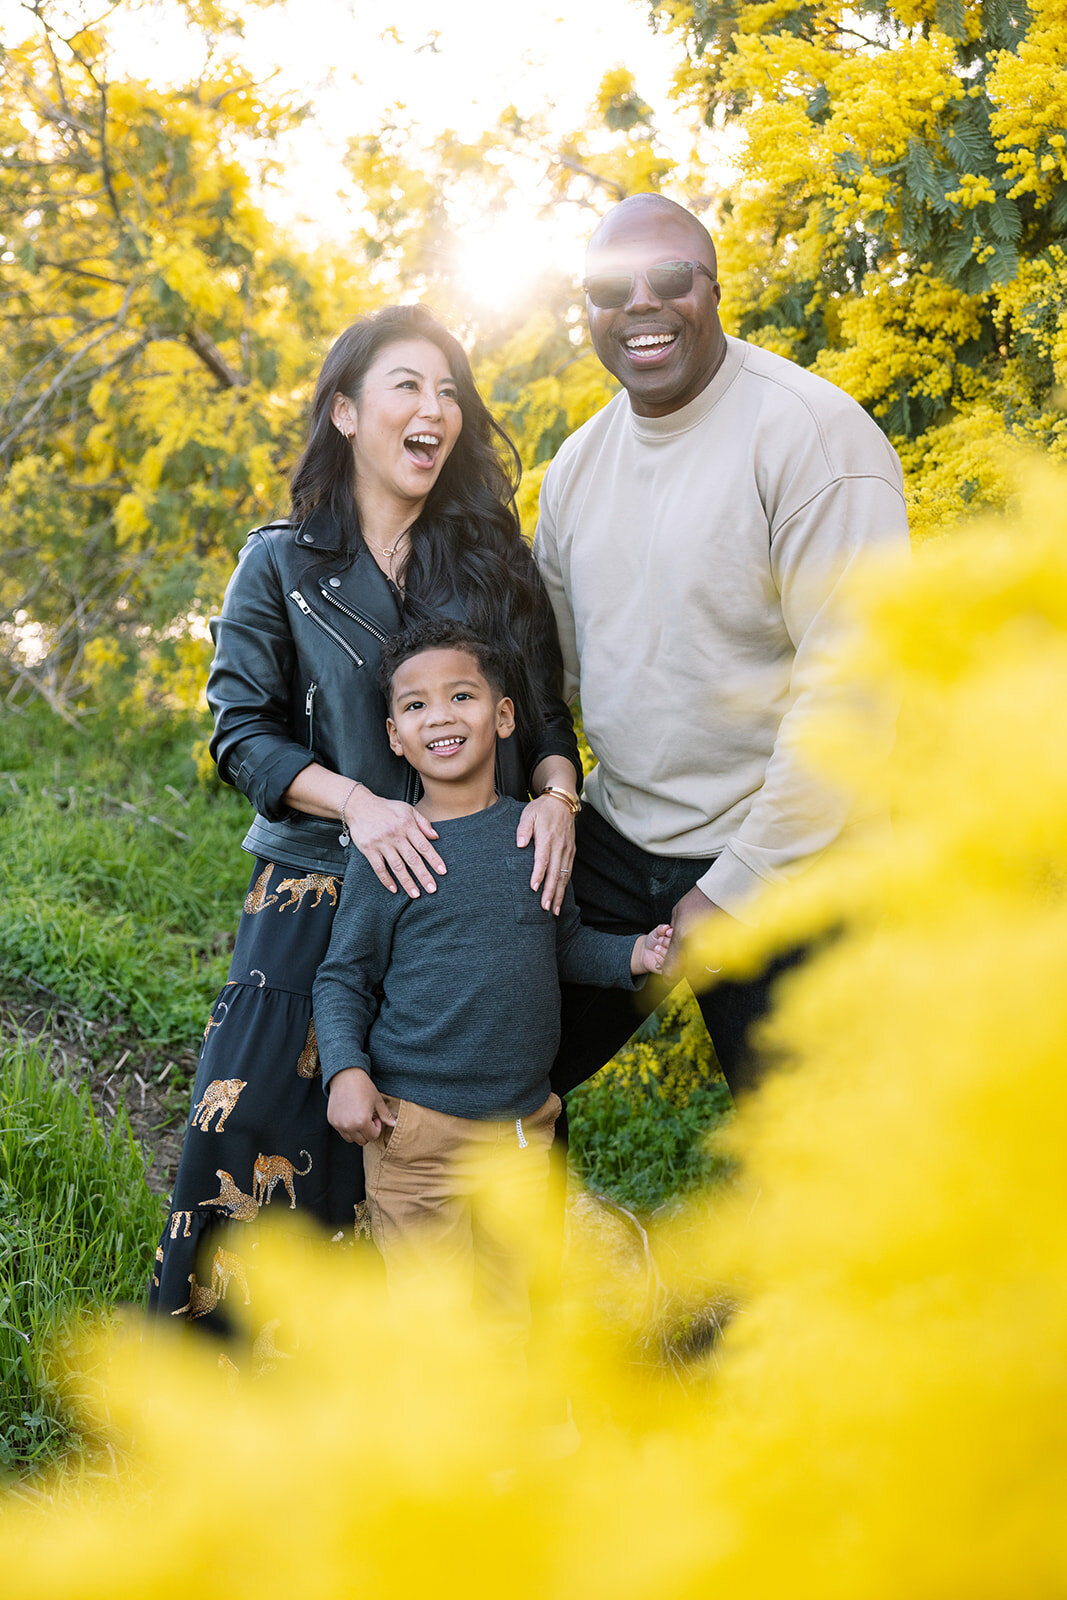 mixed race family of three smiling outdoors surrounded by blooming acacia trees